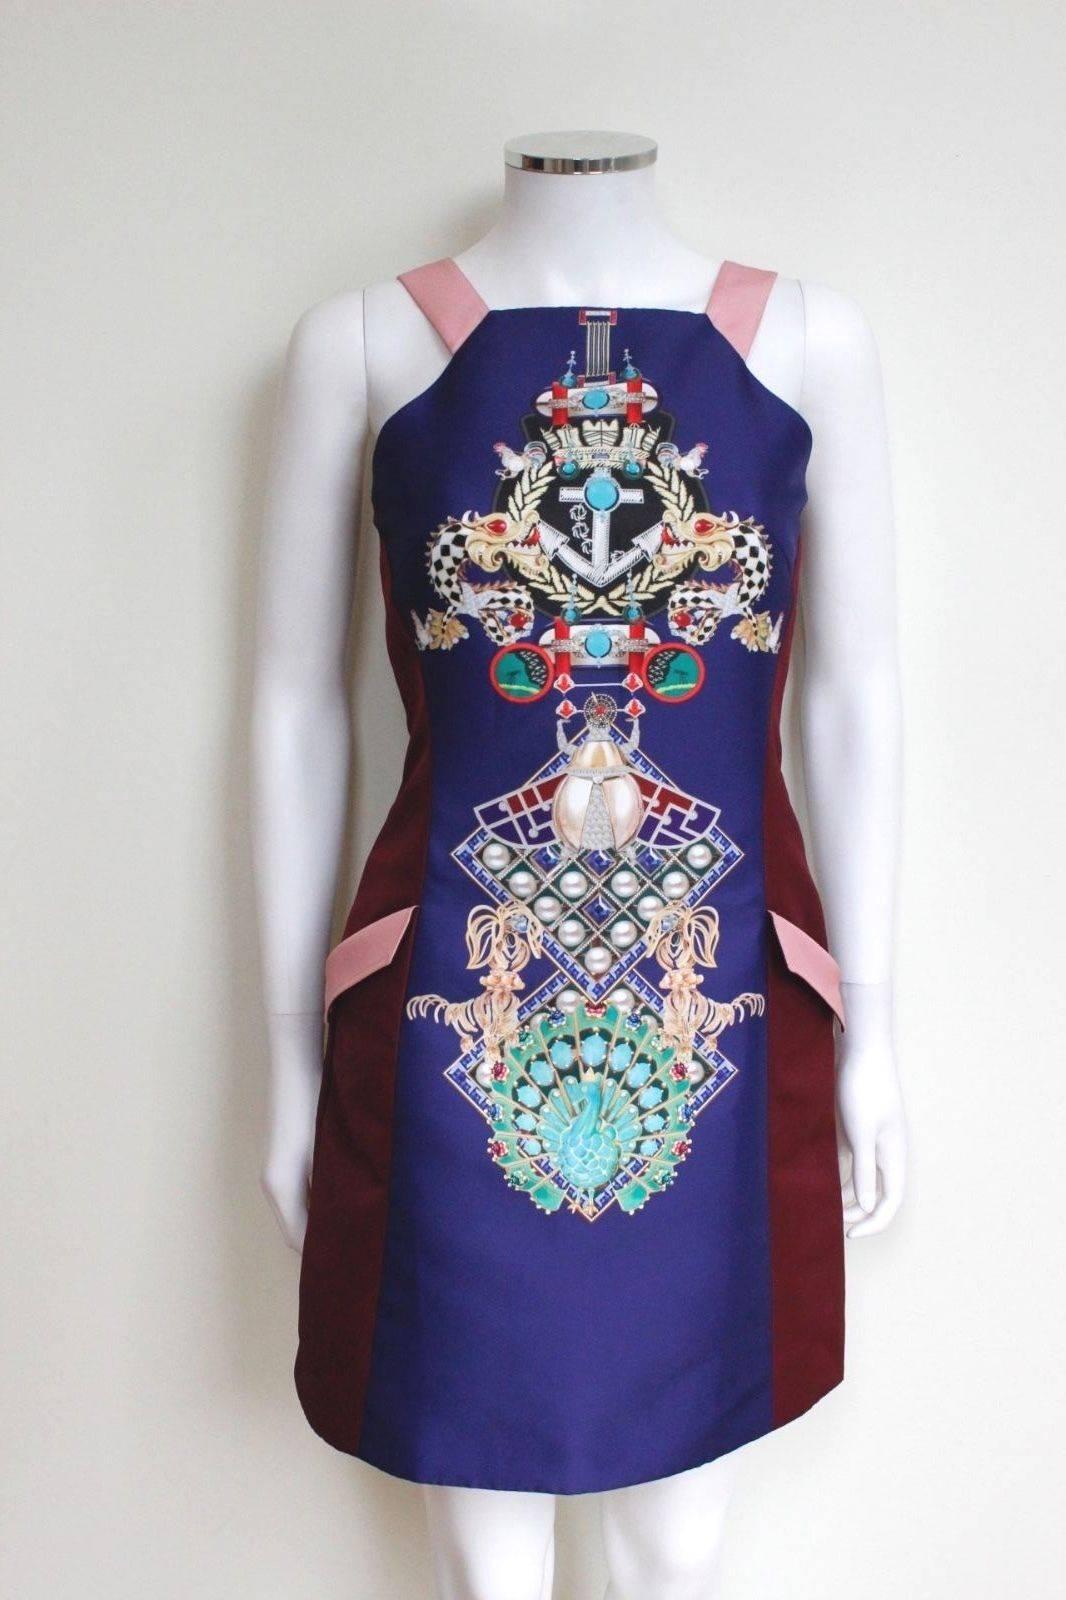 MARY KATRANTZOU Navy Fenbot Print Shift Dress uk 8 
 Multi 'Fenbot' dress from Mary Katrantzou featuring a square neck, darts to the chest, a sleeveless design, front flap pockets and a short length
Length 33 inches, chest 16 inches across, waist 13